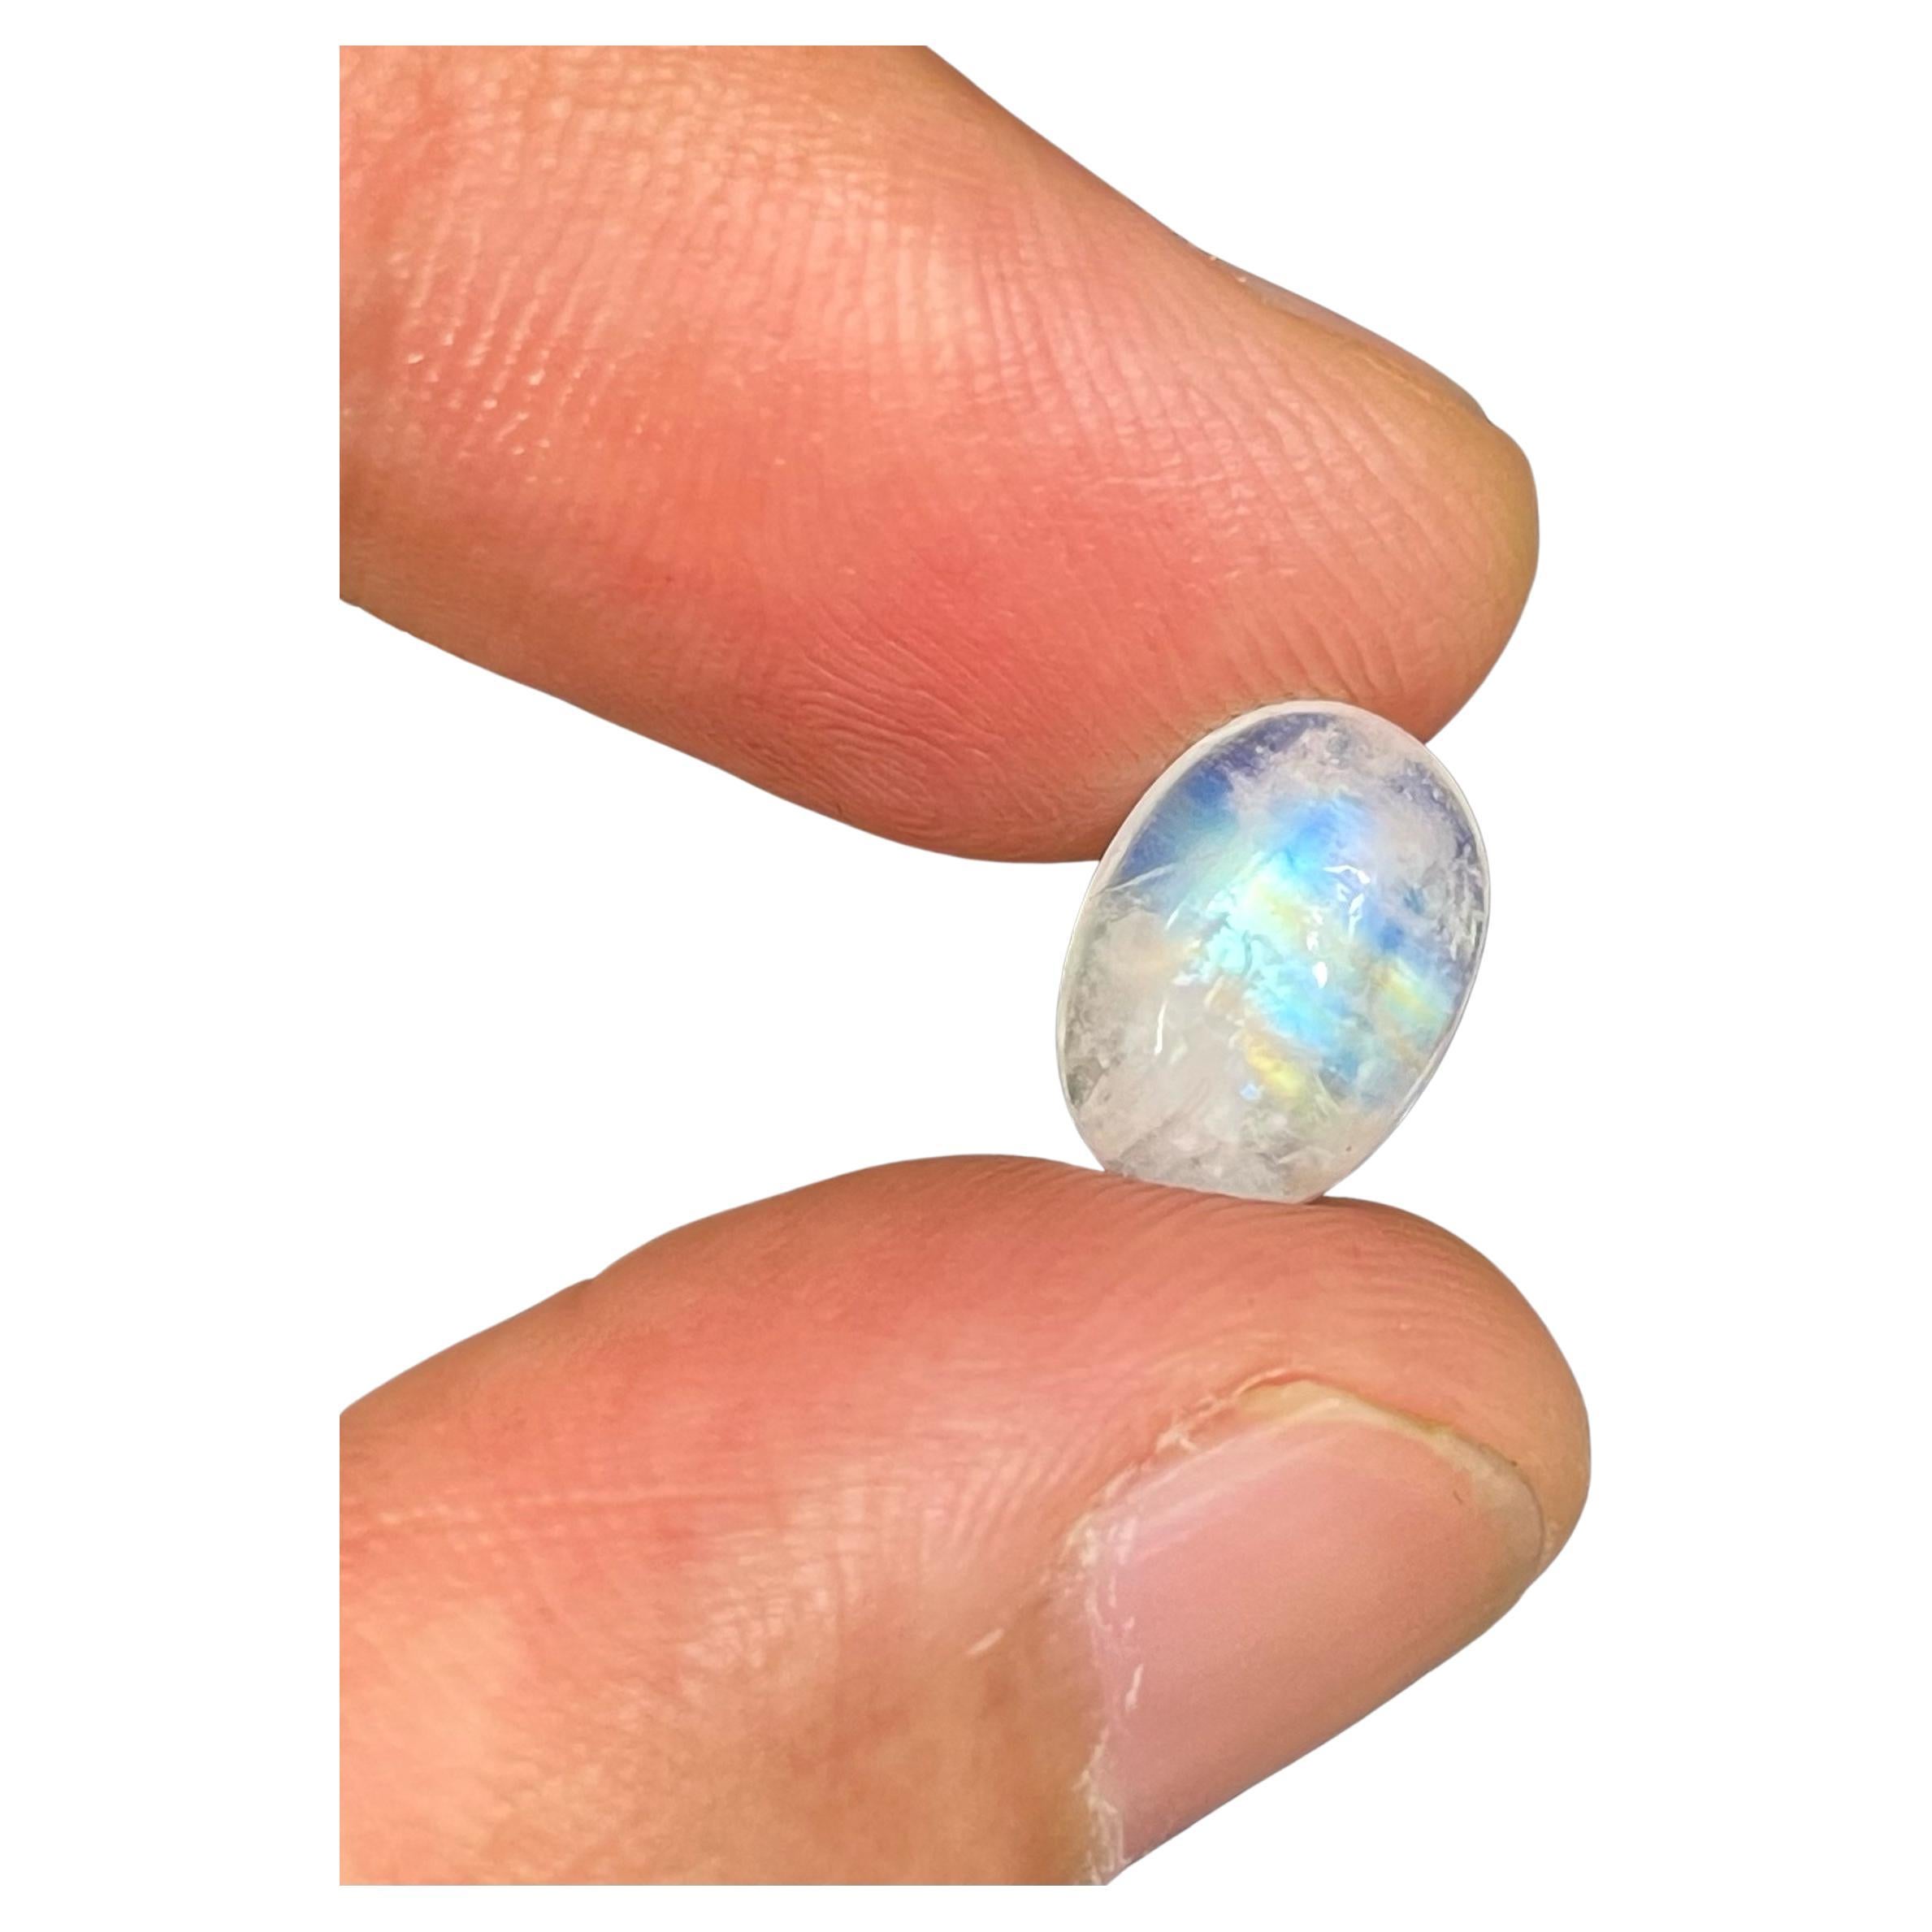 Lovely Natural Loose Moonstone Gemstone 2.95 Carats Moonstone Ring For Sale